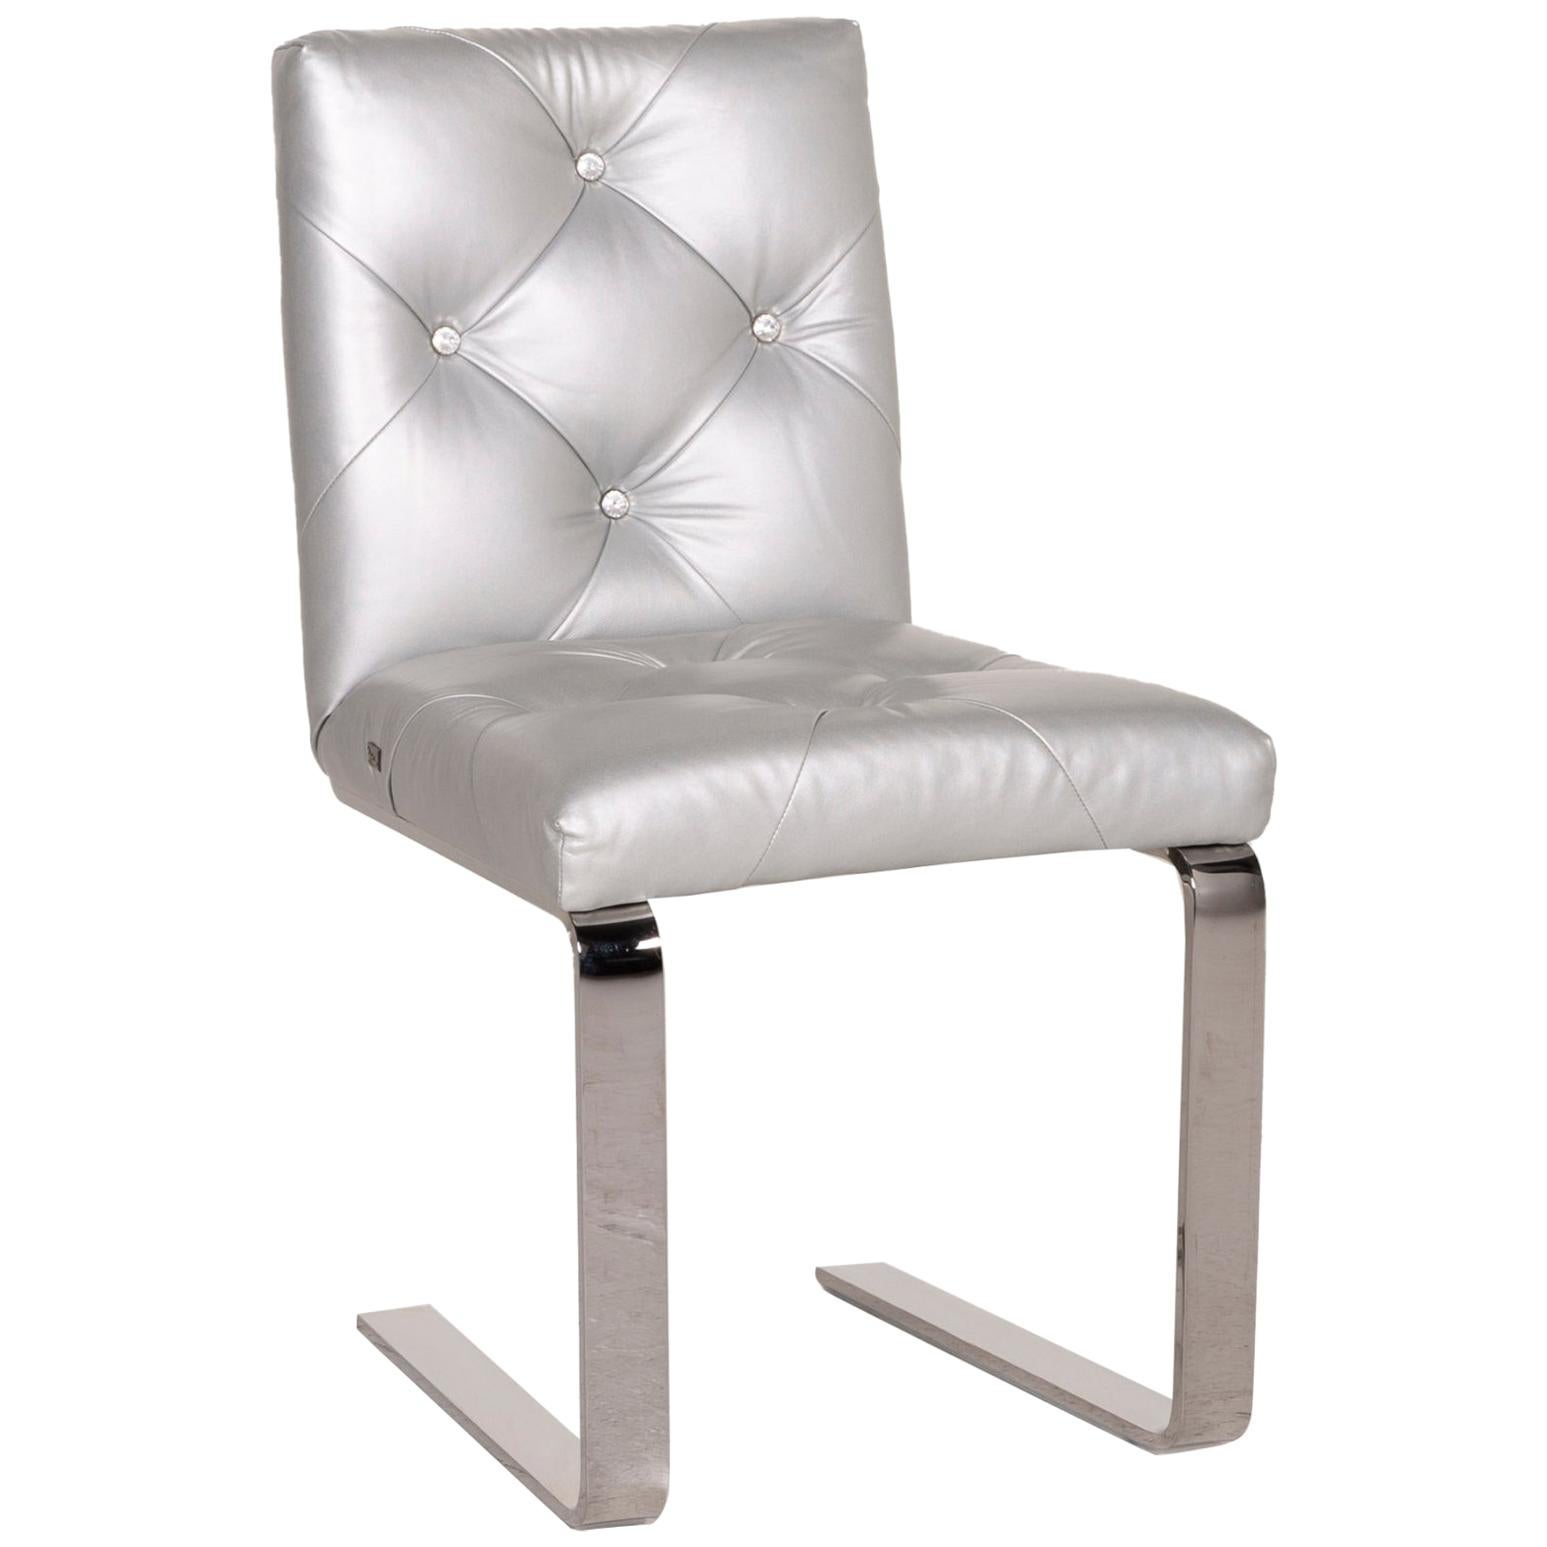 Bretz Marilyn Leather Chair Silver Chrome For Sale